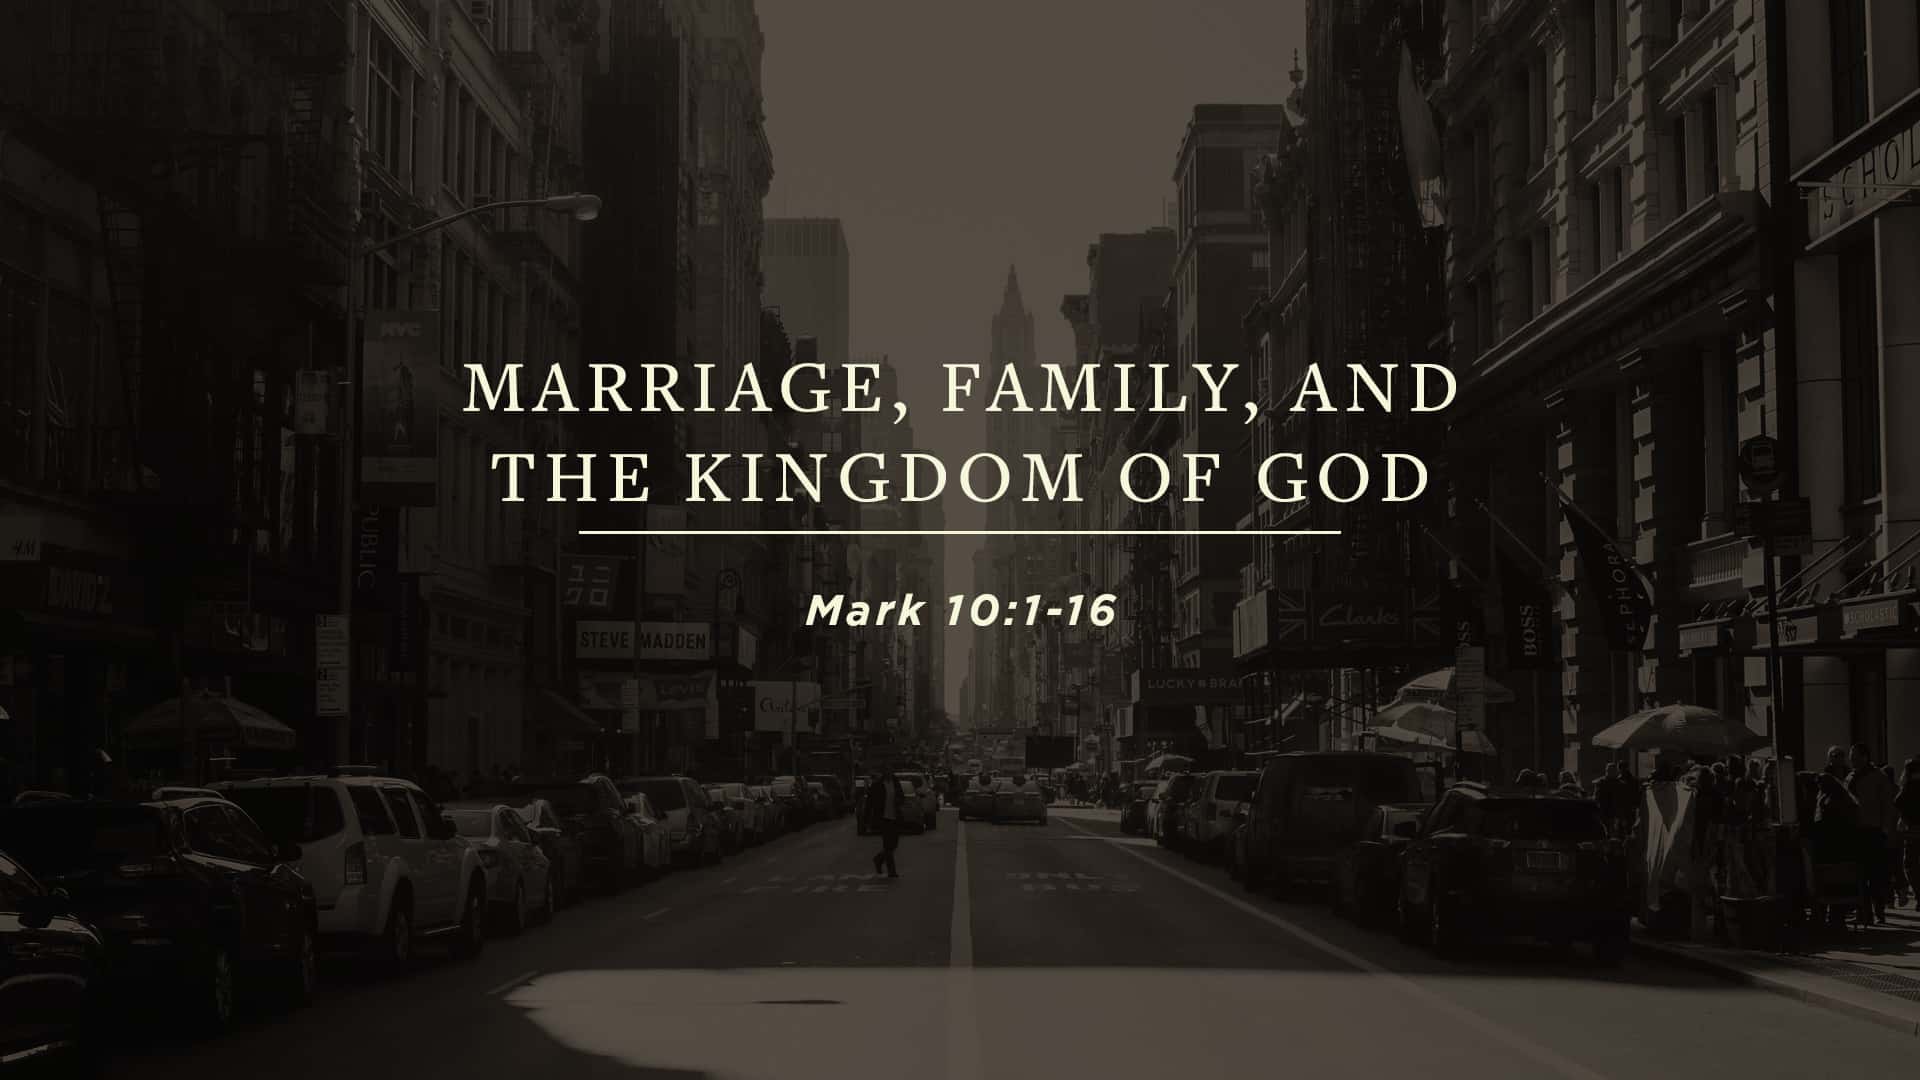 Marriage, Family, and the Kingdom of God